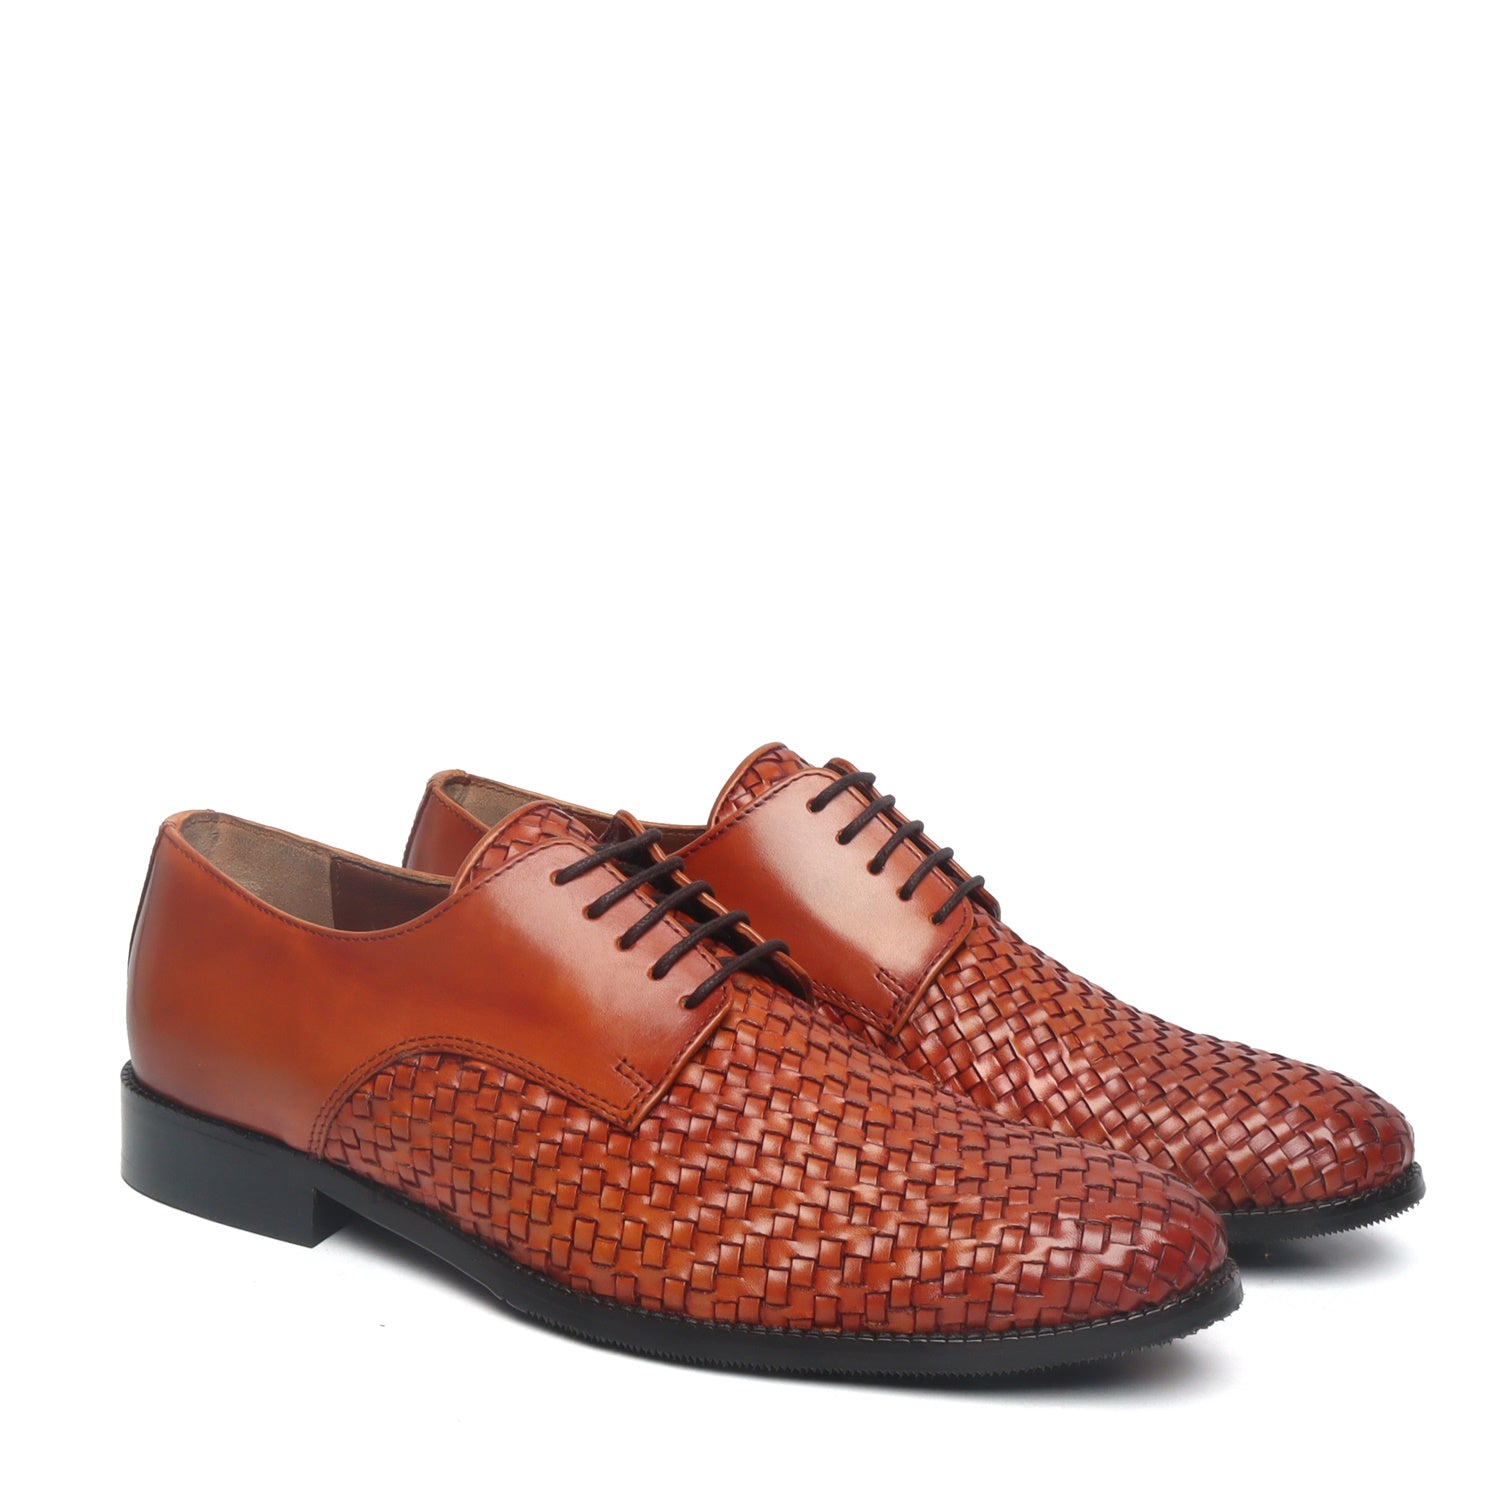 Tan Hand weaved front lace up formal shoe